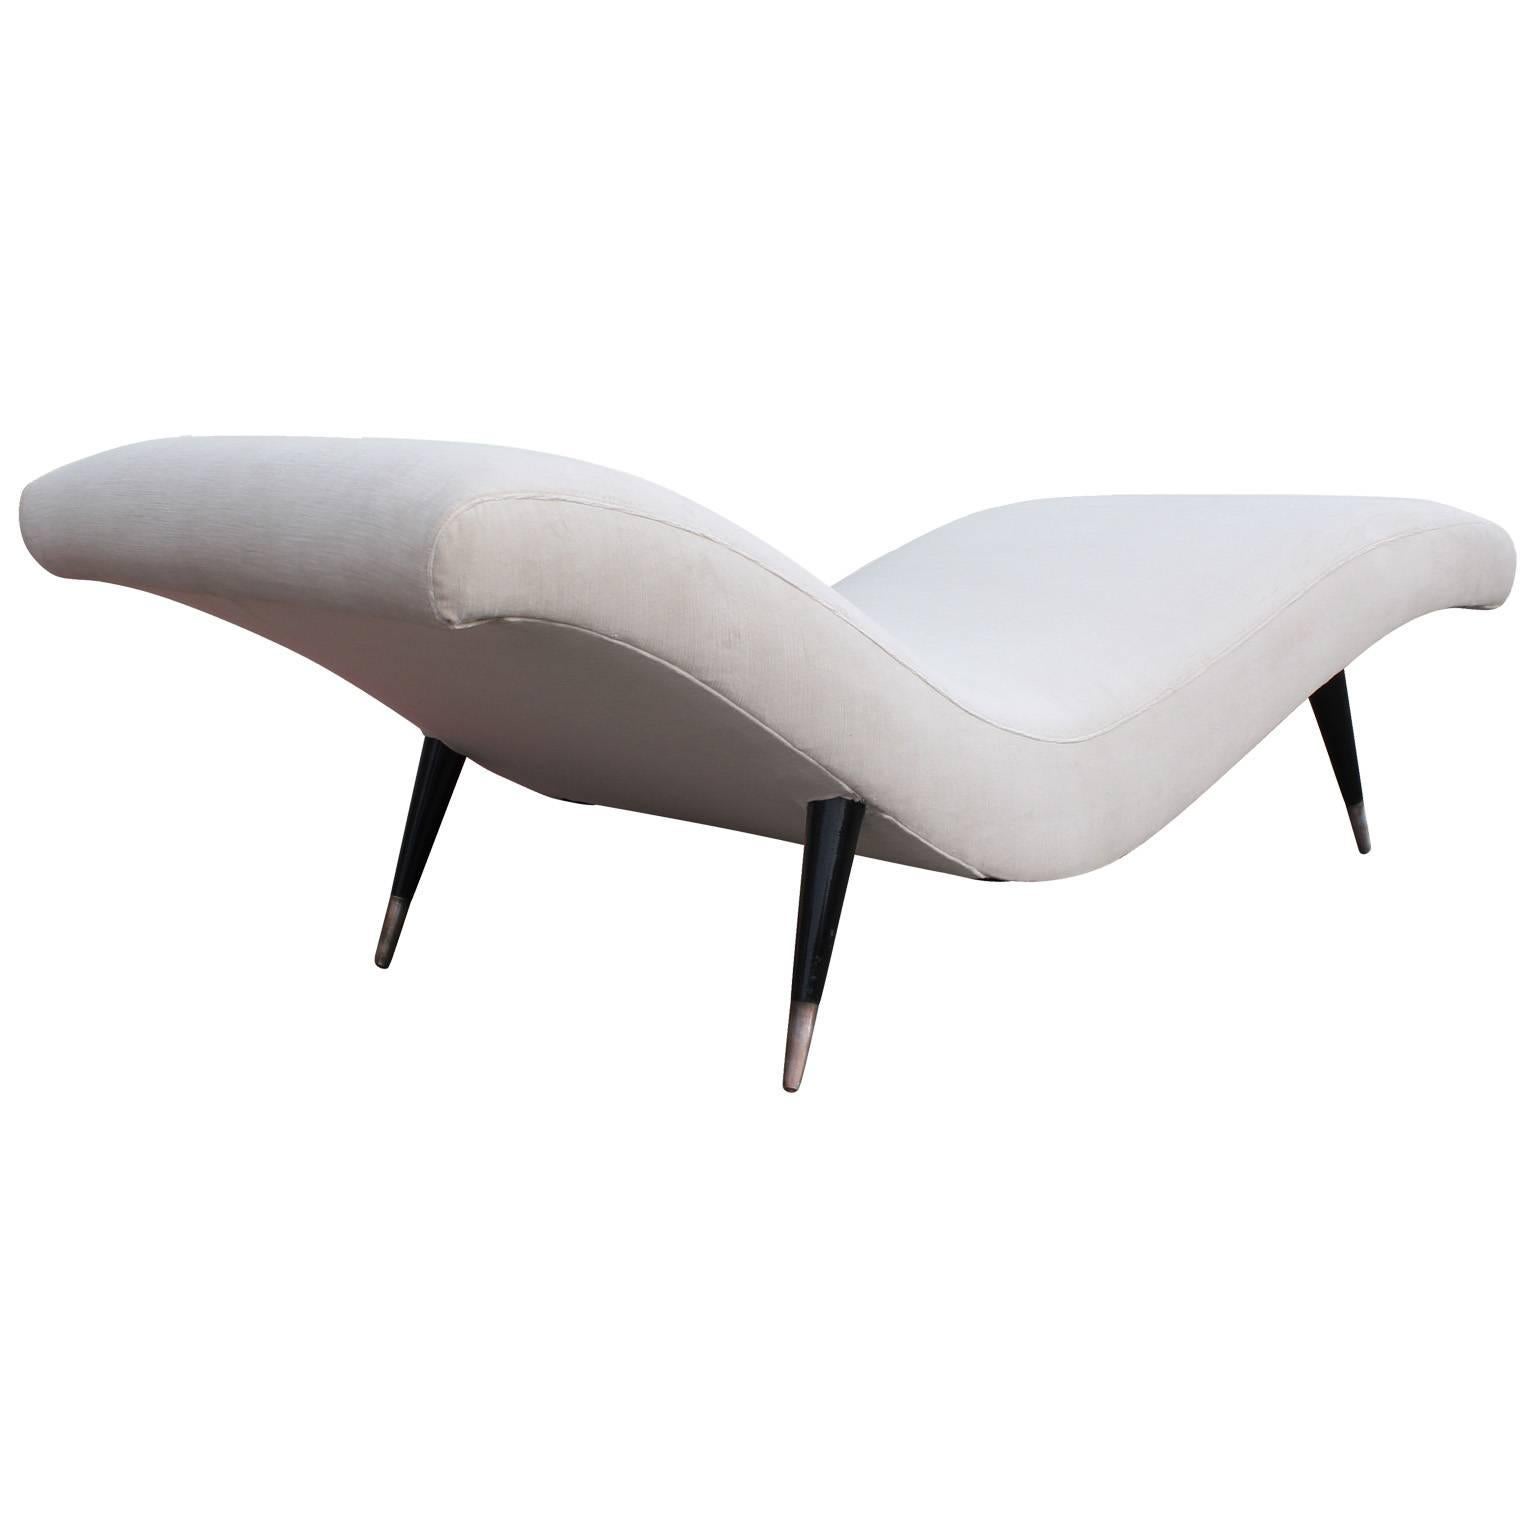 Mid-20th Century Ultra Luxe Wave Chaise Longue in Cream Velvet